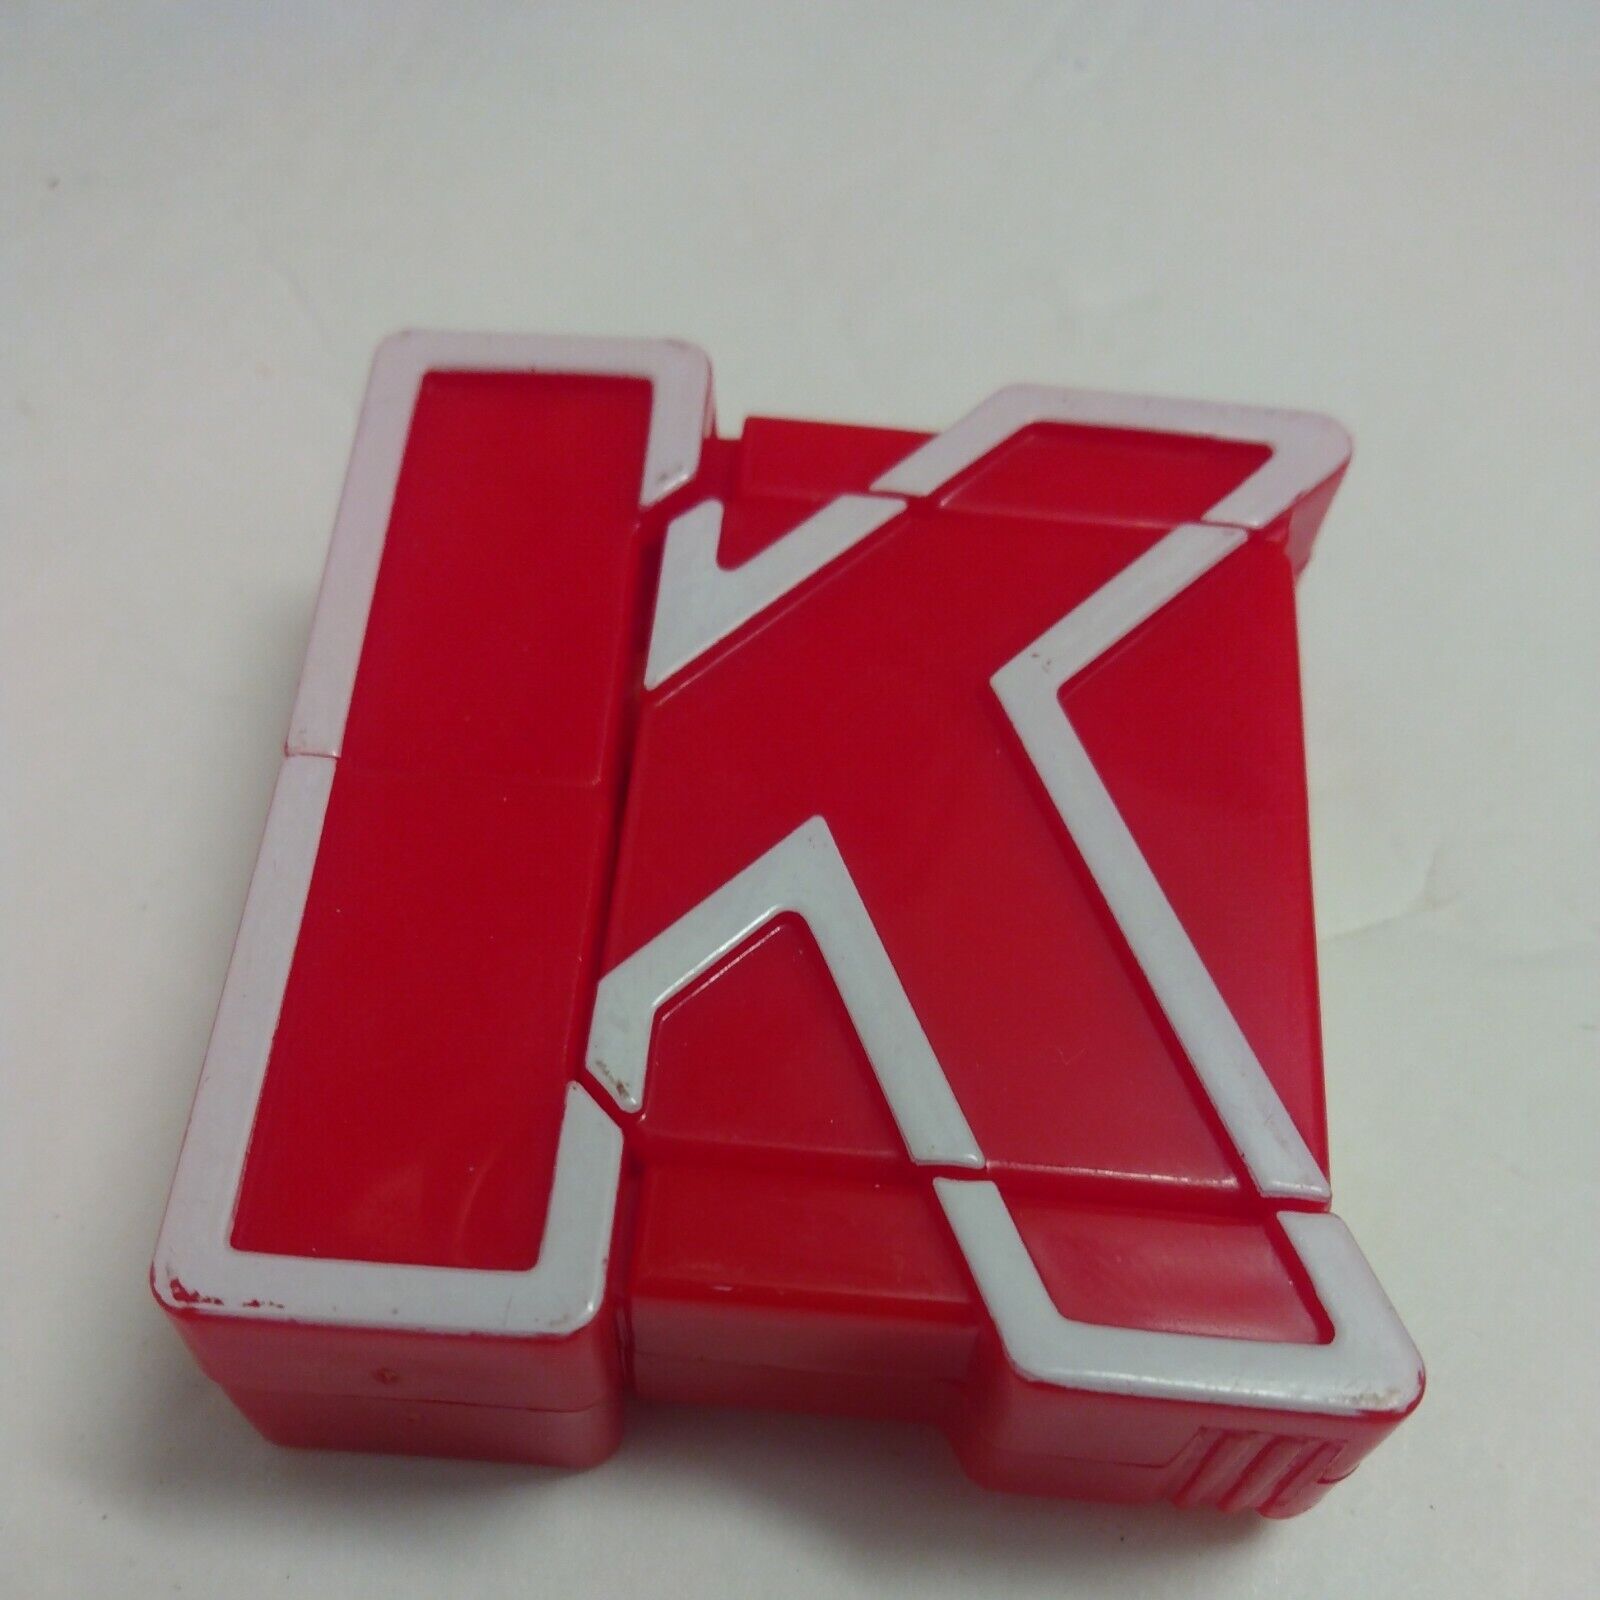 Lakeshore Alpha Bots Replacement Letter  "k"  Transforms To Robot